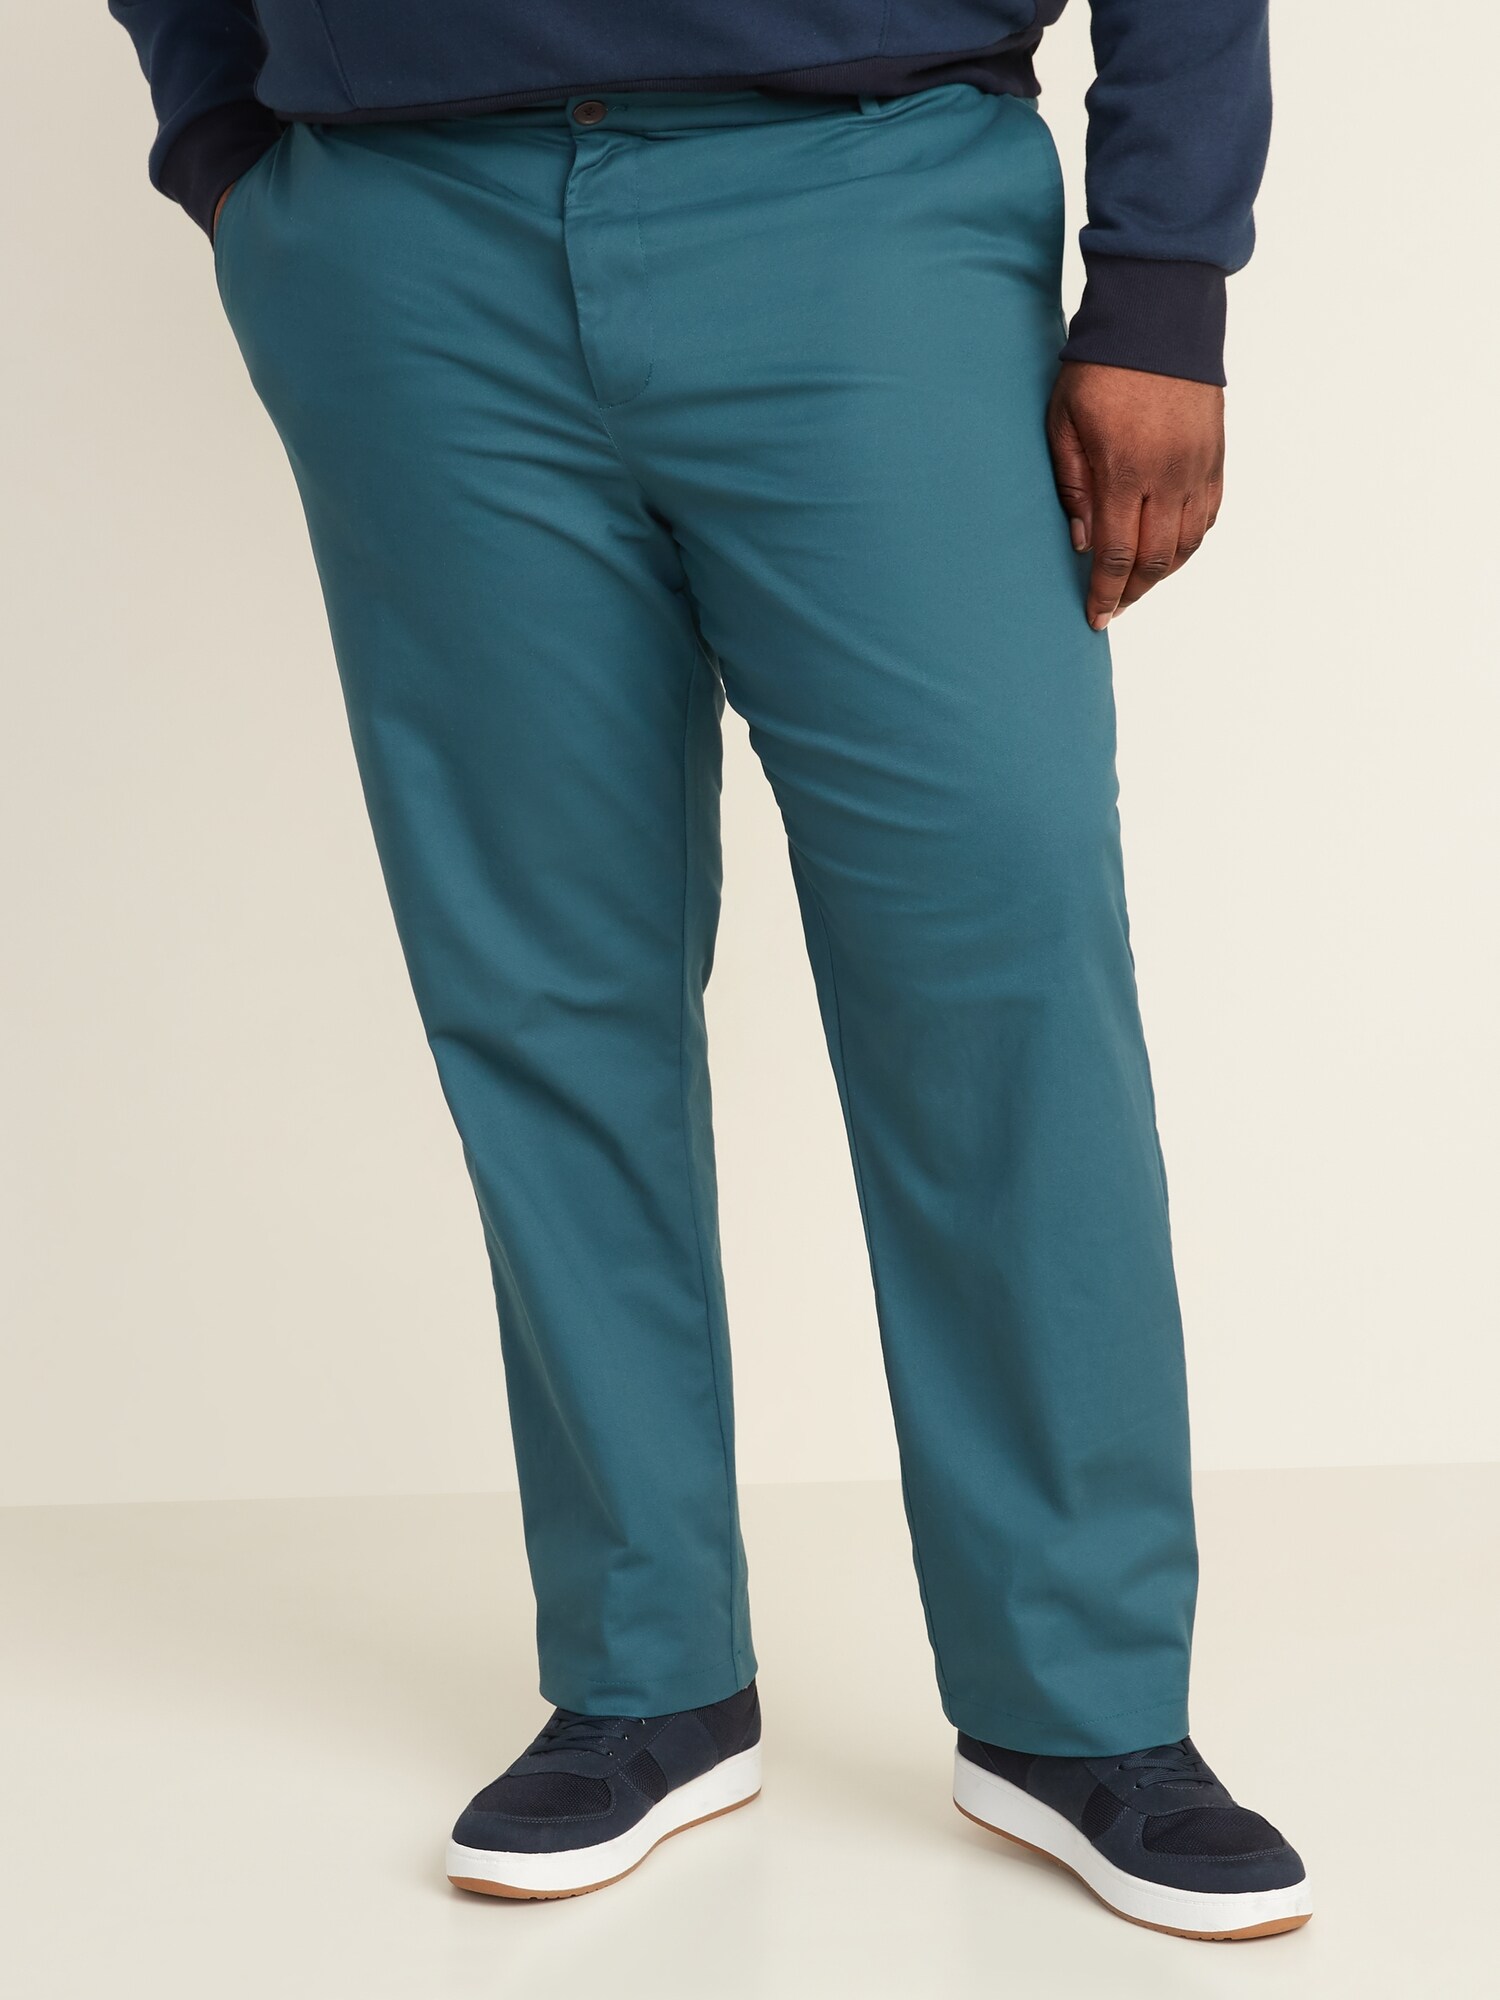 All-New Slim Ultimate Built-In Flex Chinos for Men | Old Navy